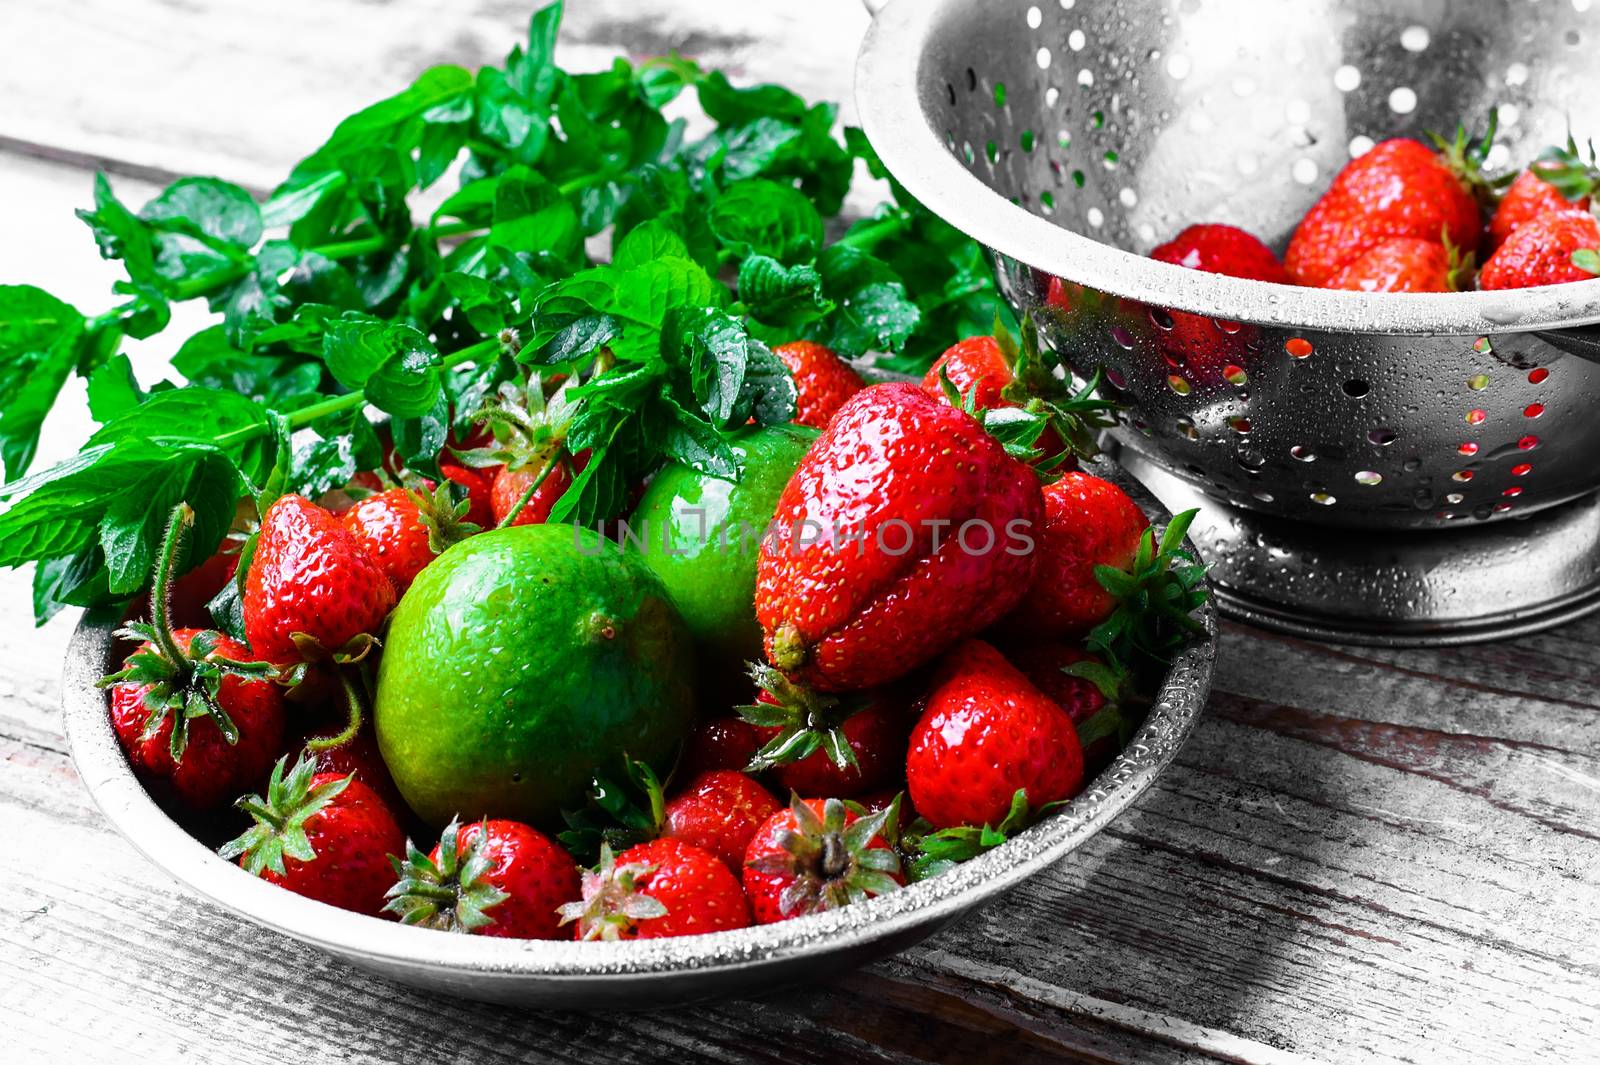 Aroma of summer fruits by LMykola